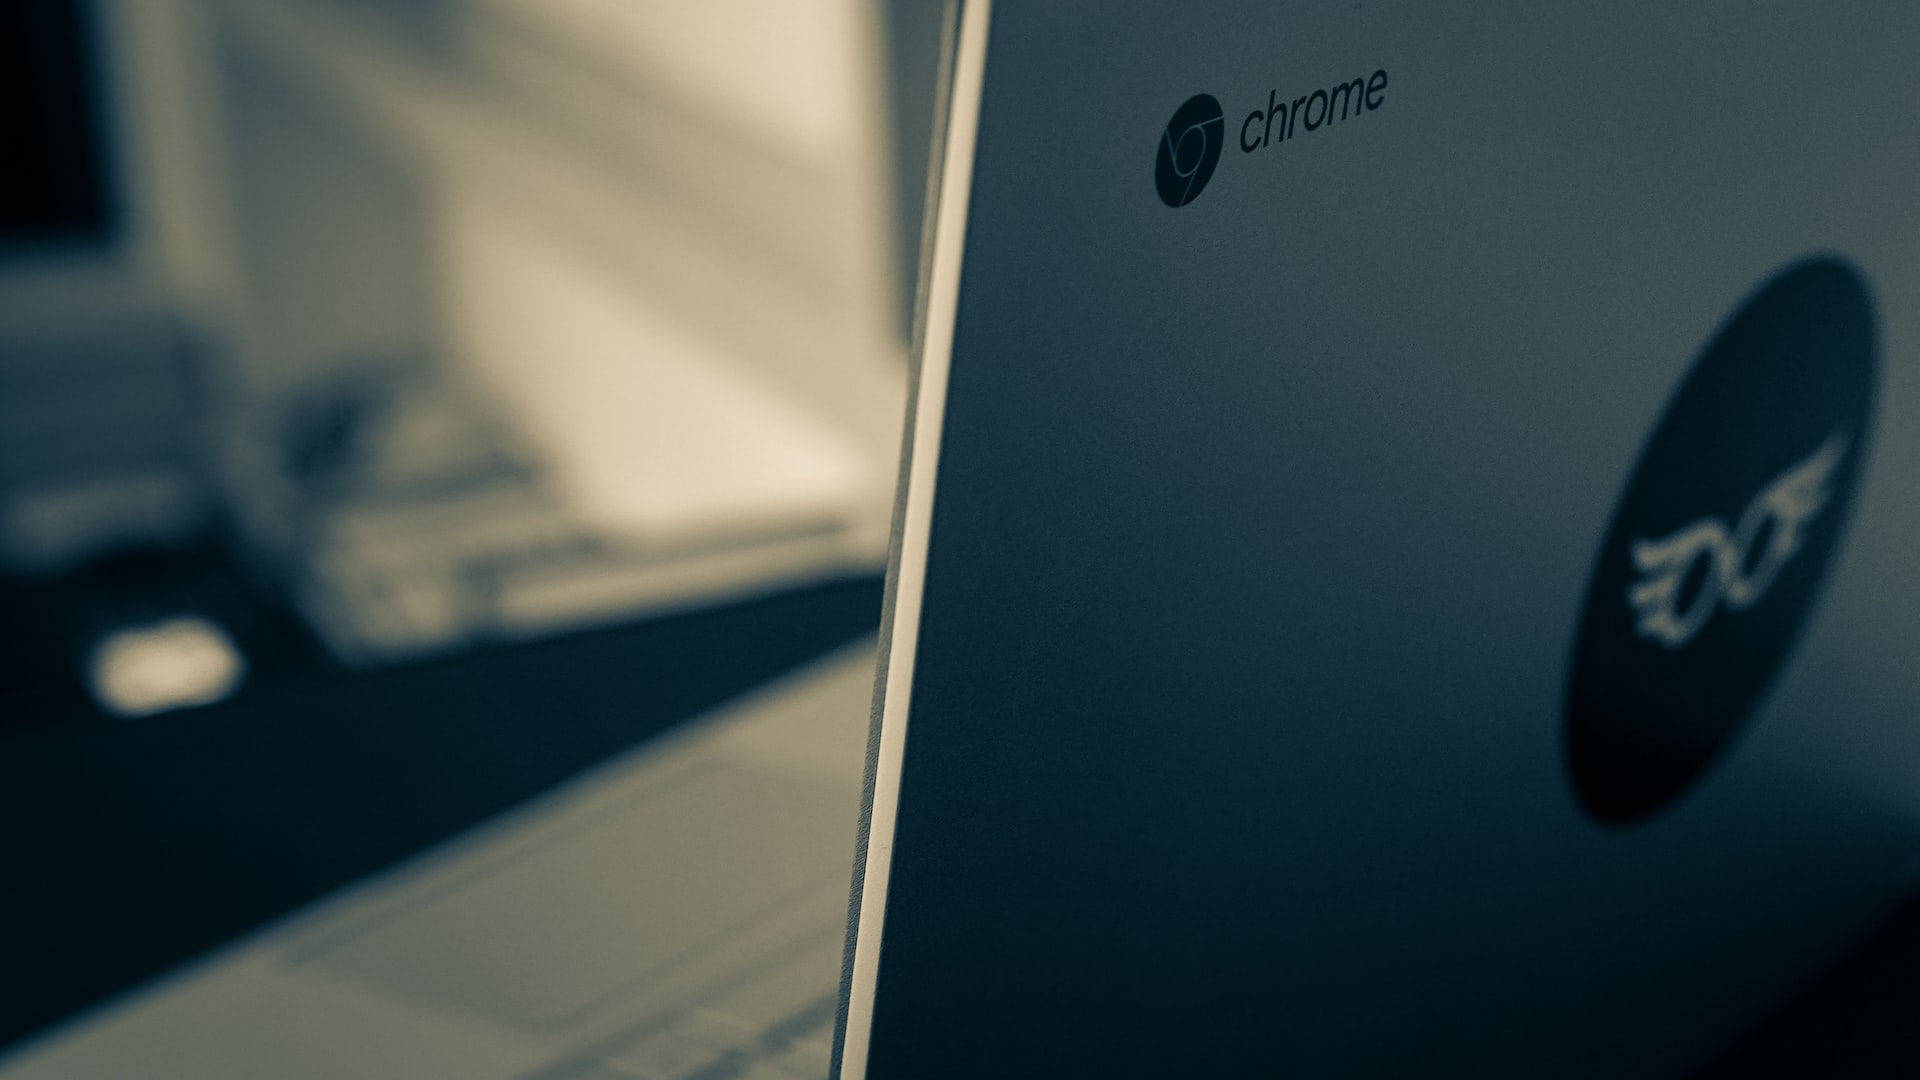 how to find deleted files on chromebook